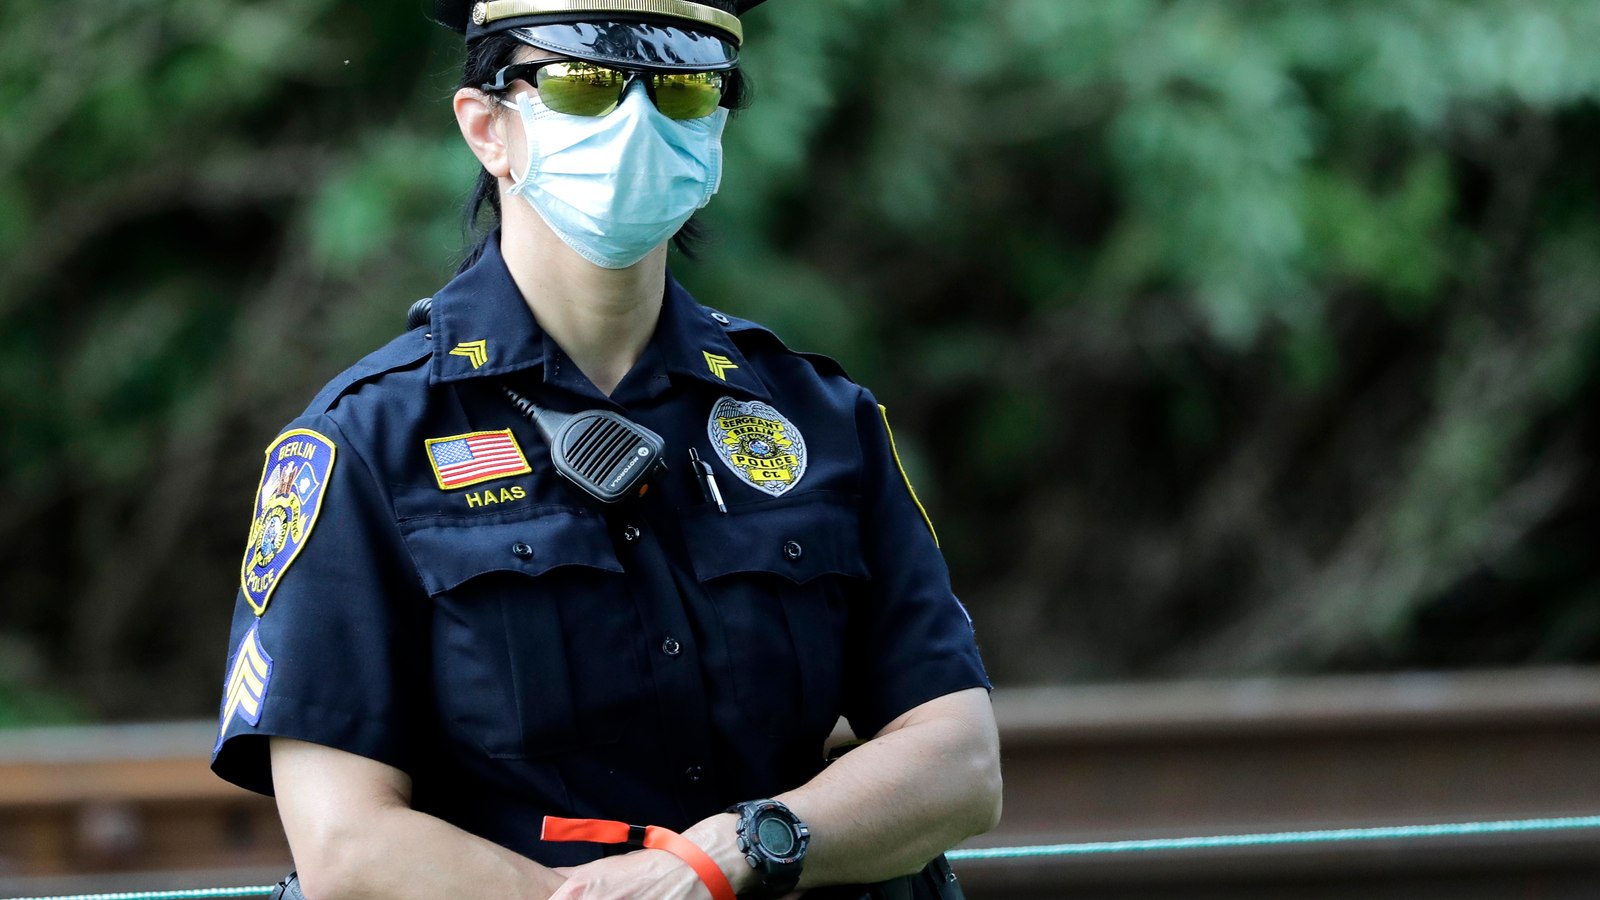 Perceptions of Police Using PPE During the Pandemic